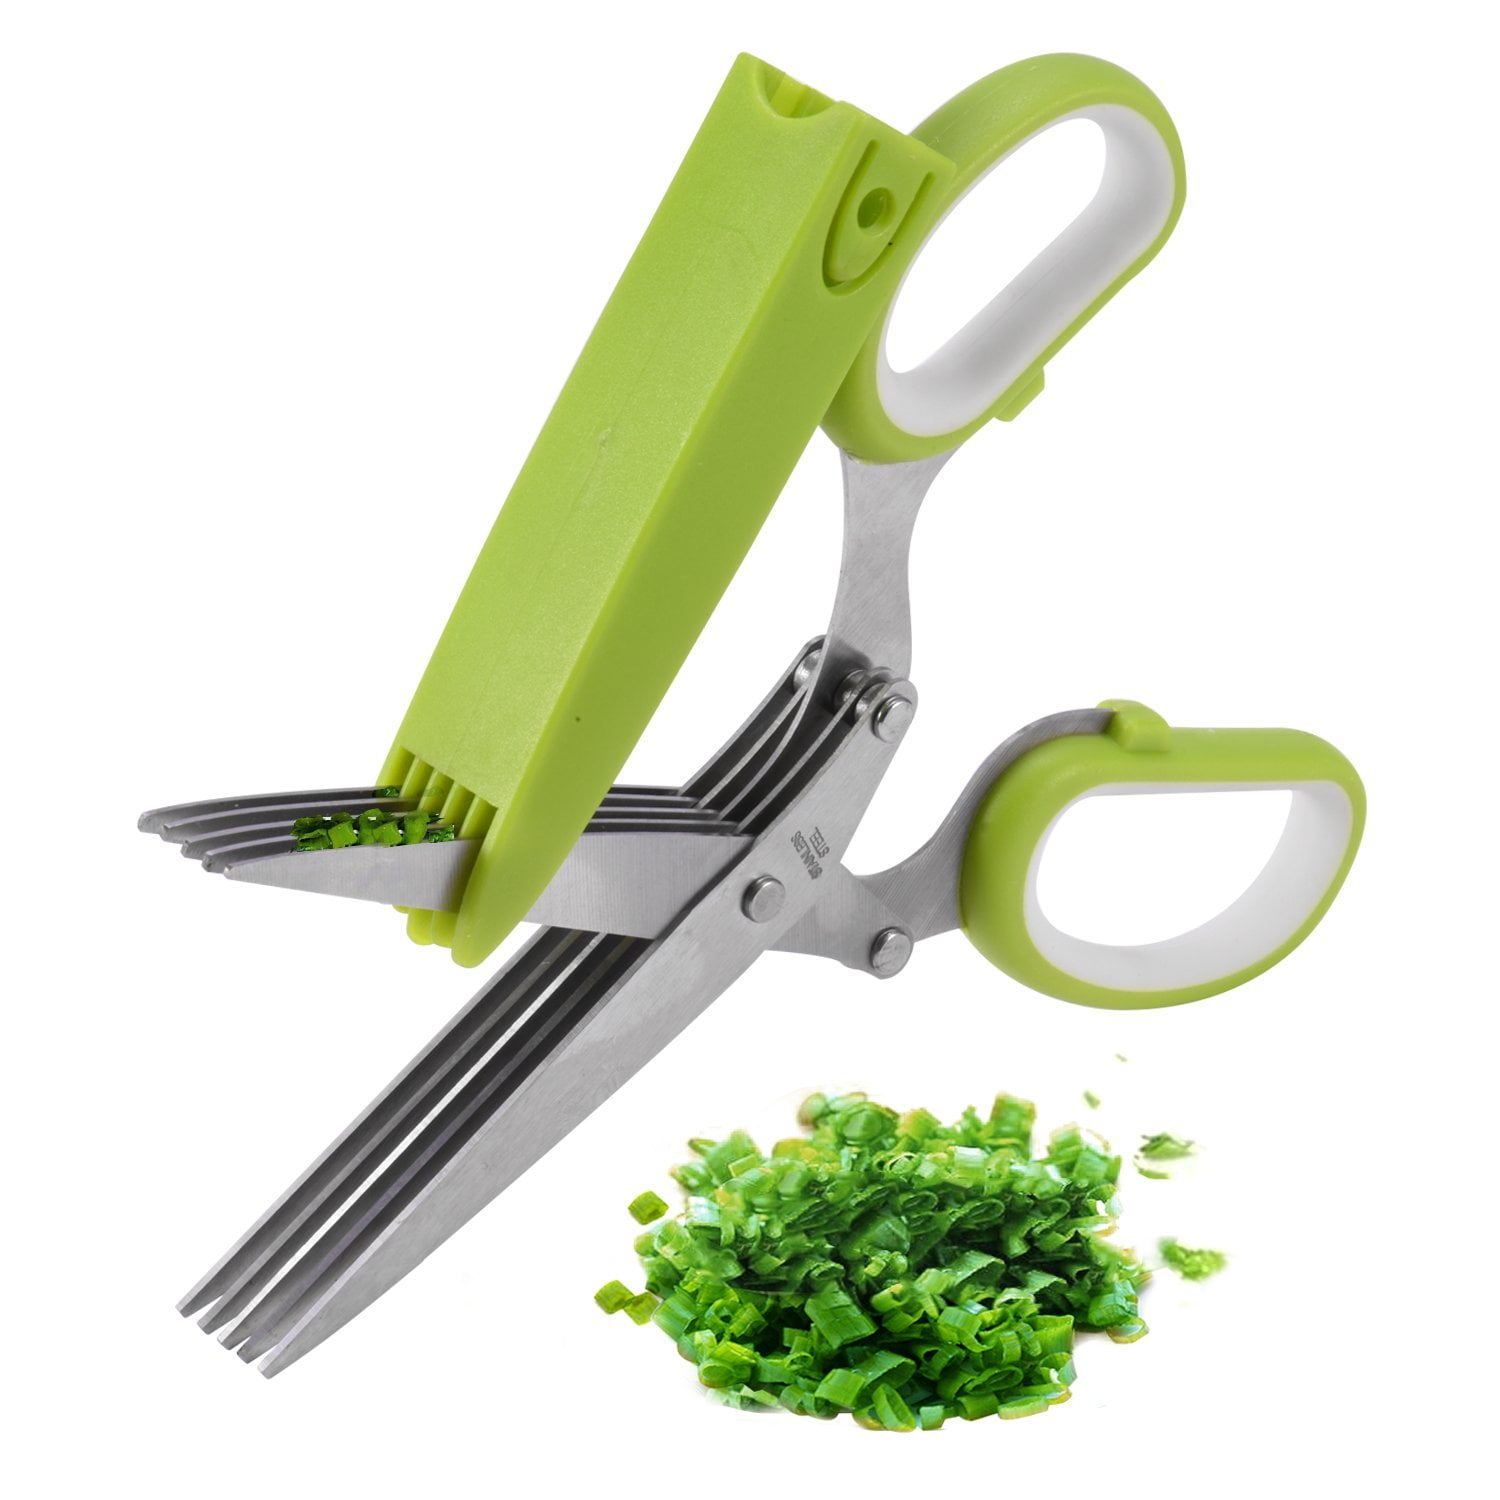 VERSAINSECT sors [Made in Japan] Heavy Duty Stainless Steel All Purpose  Kitchen Shears Tool With Ergonomic Handle for Herbs, Vegetable, Meat, Food